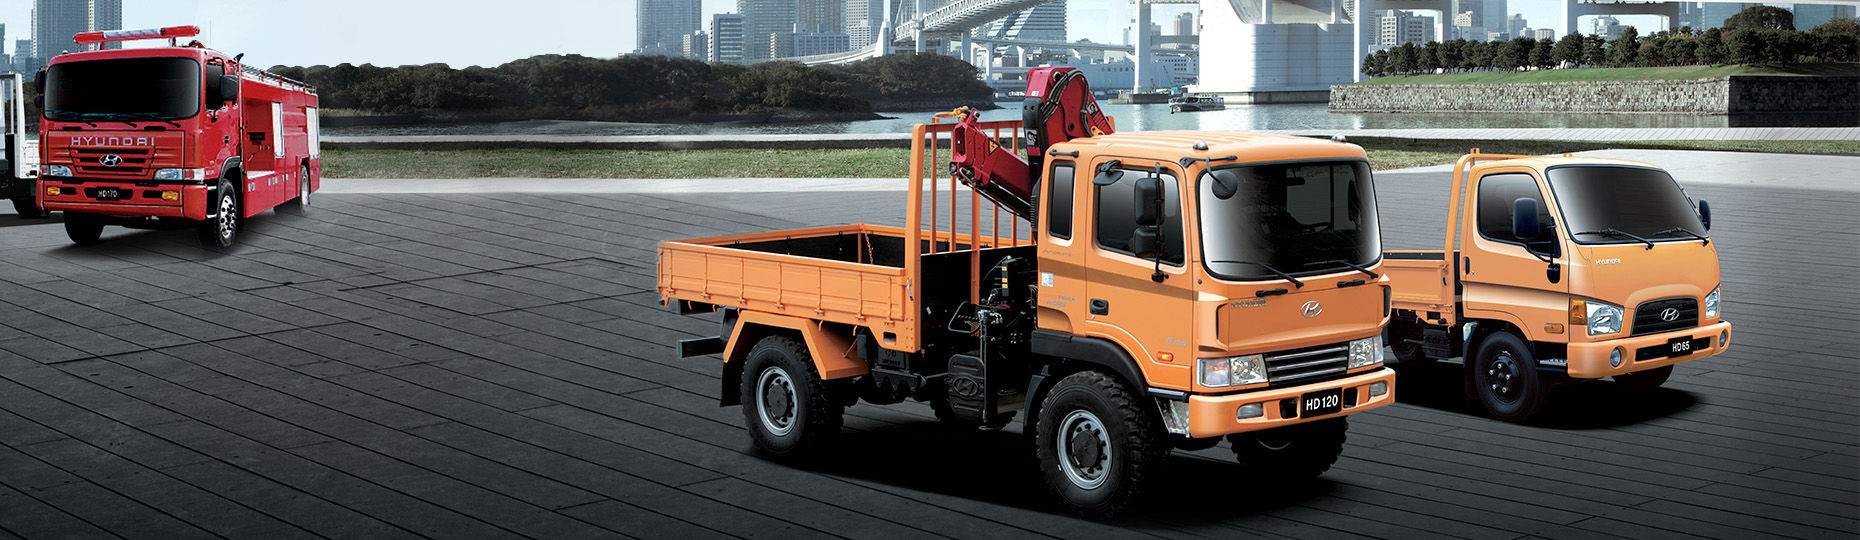 special-purpose-fire-fighting-truck-kv